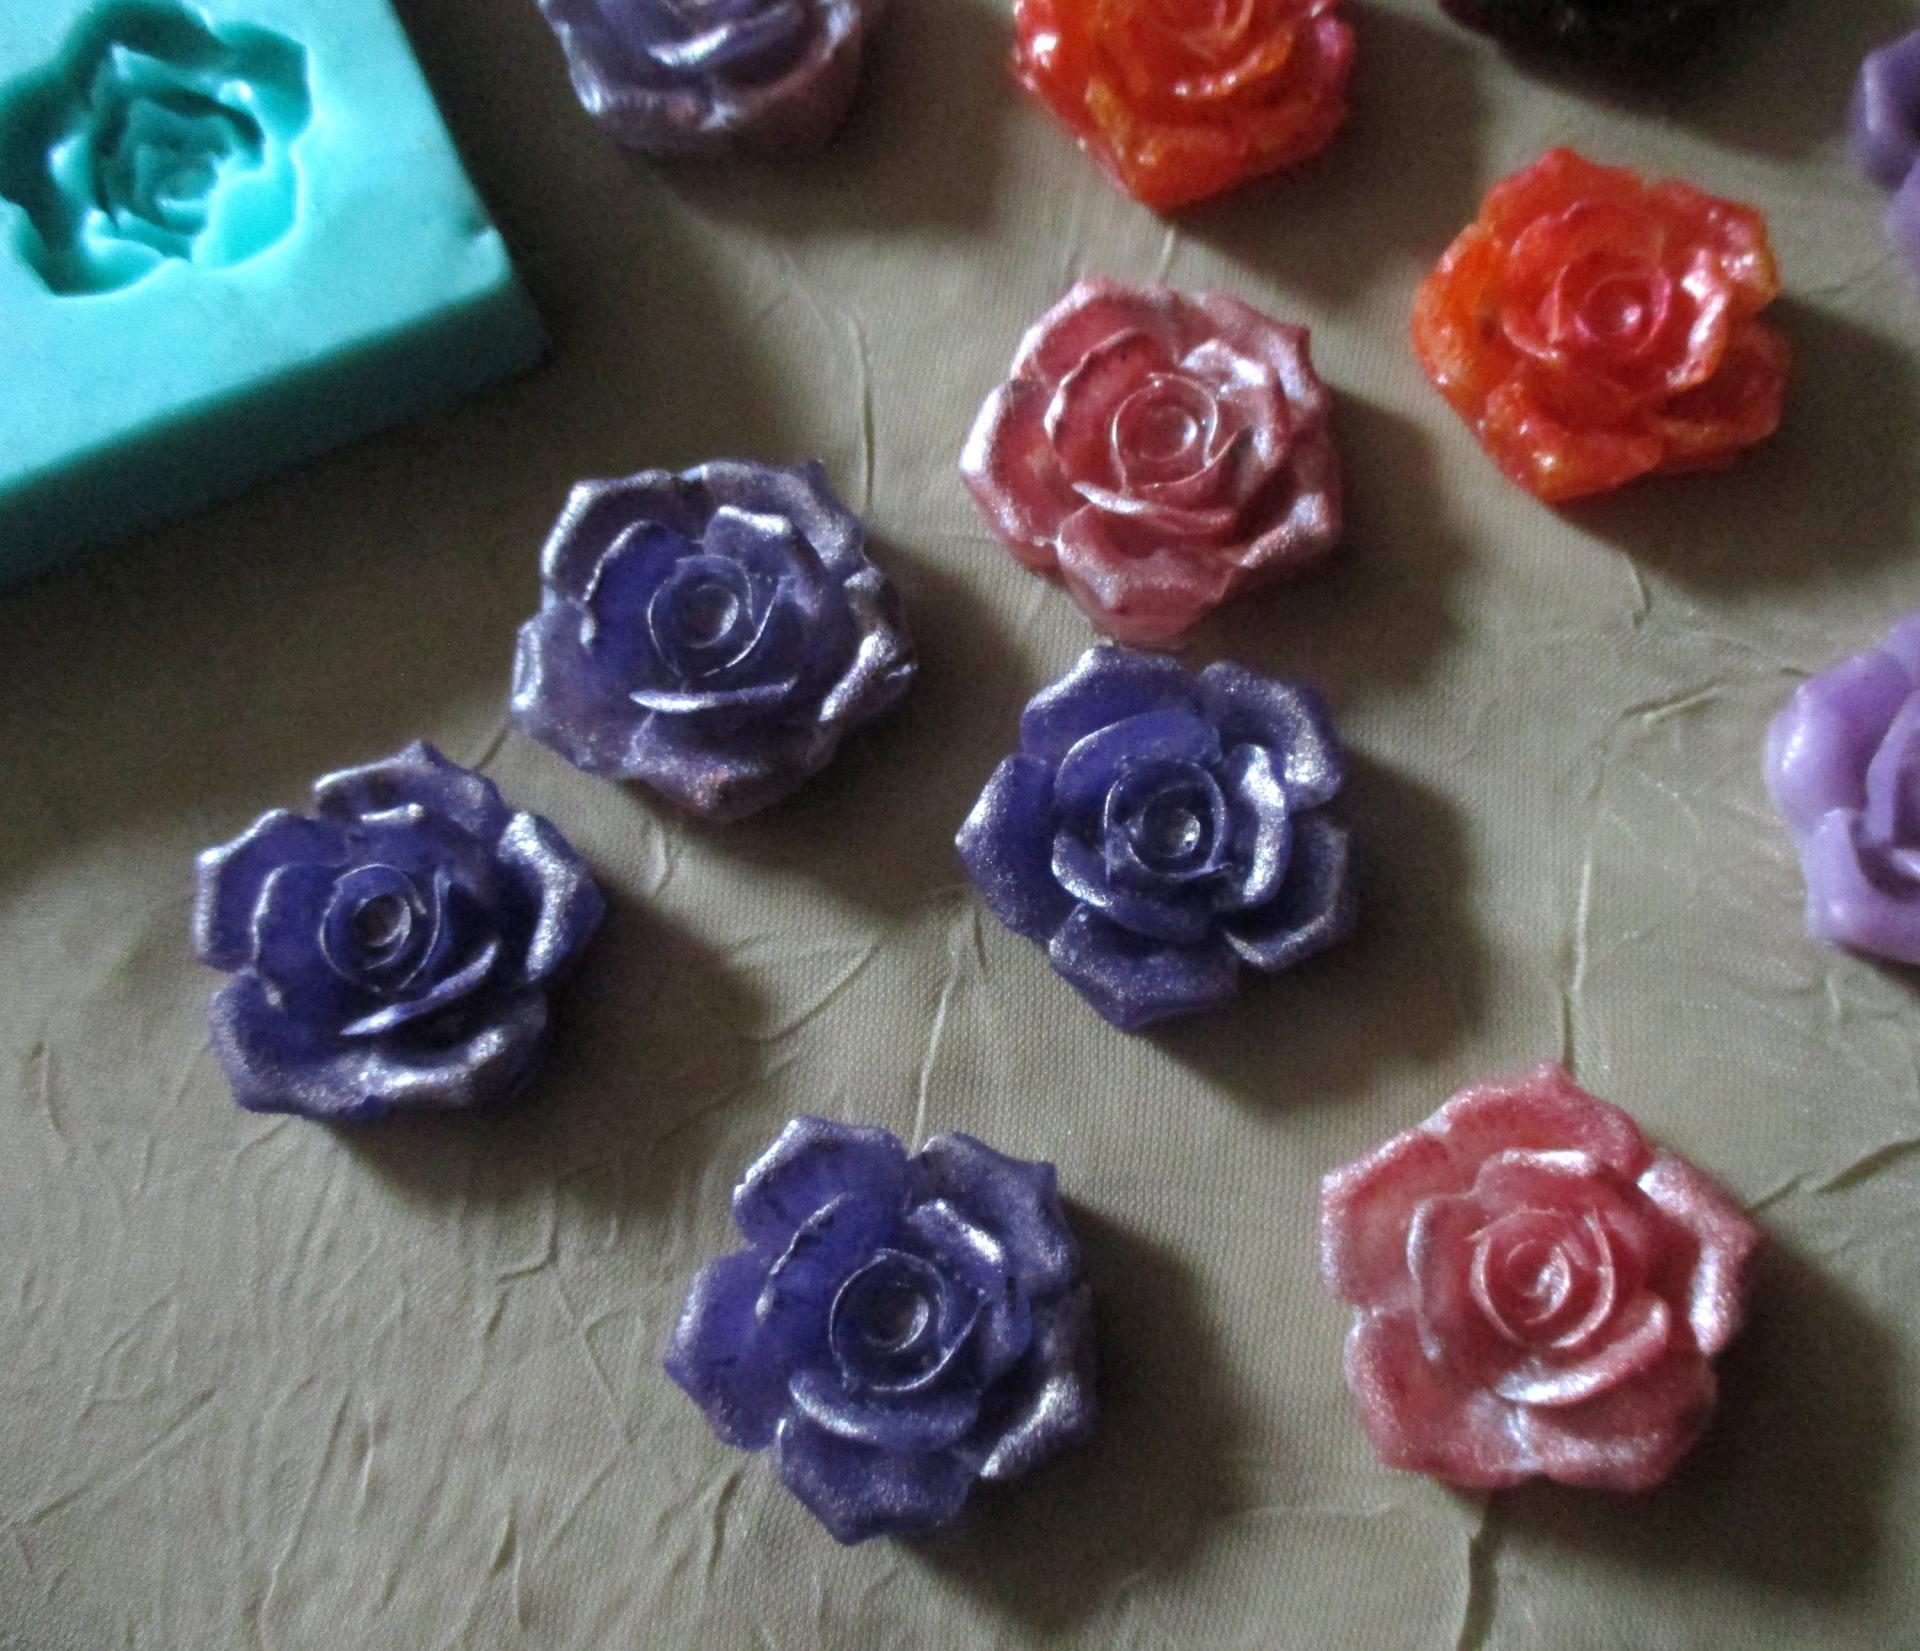 Small Floral Mold - Roses - for Resin, Clay, Casting and Baking, or for Soap or wax embeds